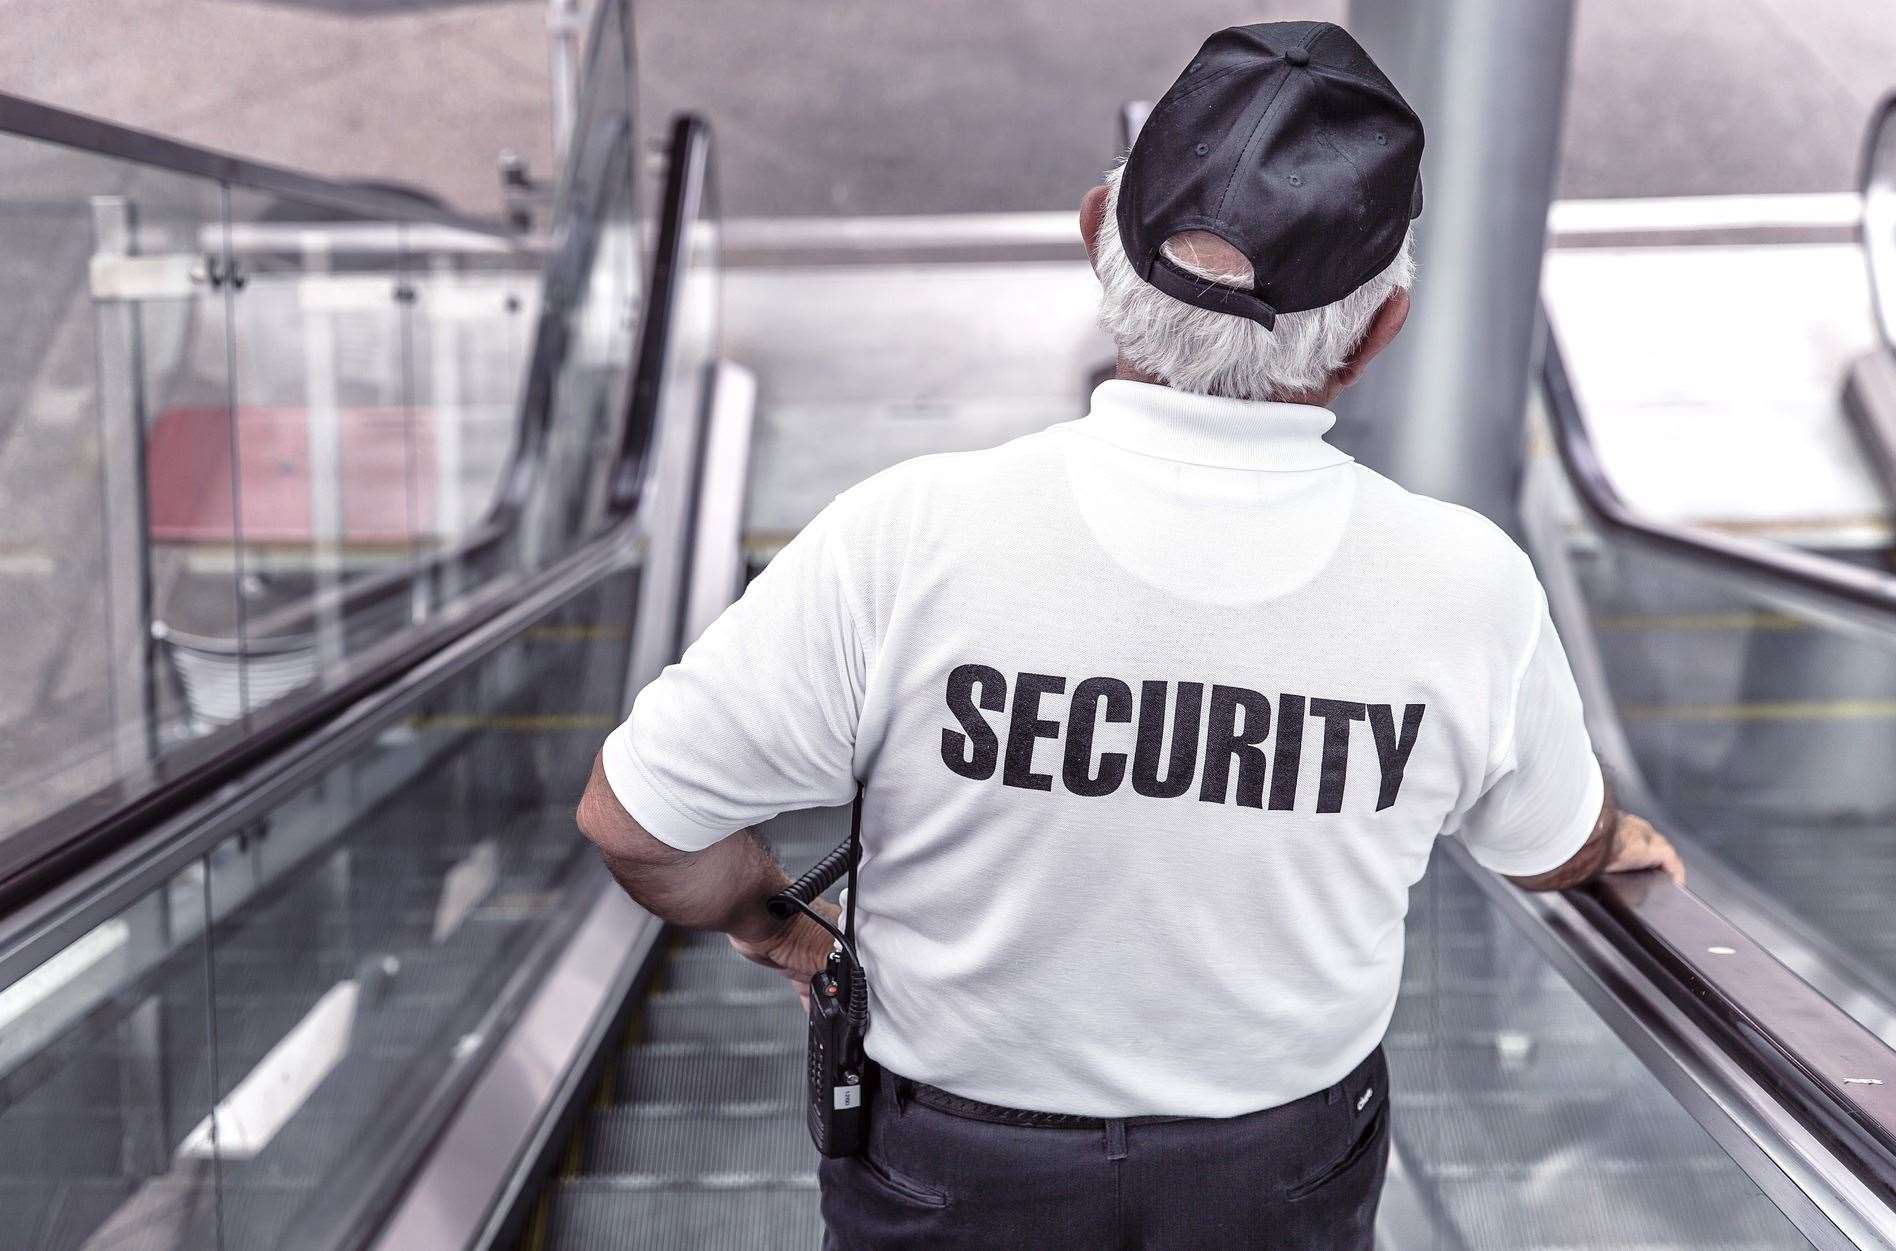 Security guards in shops are commonplace. Picture: Pixabay